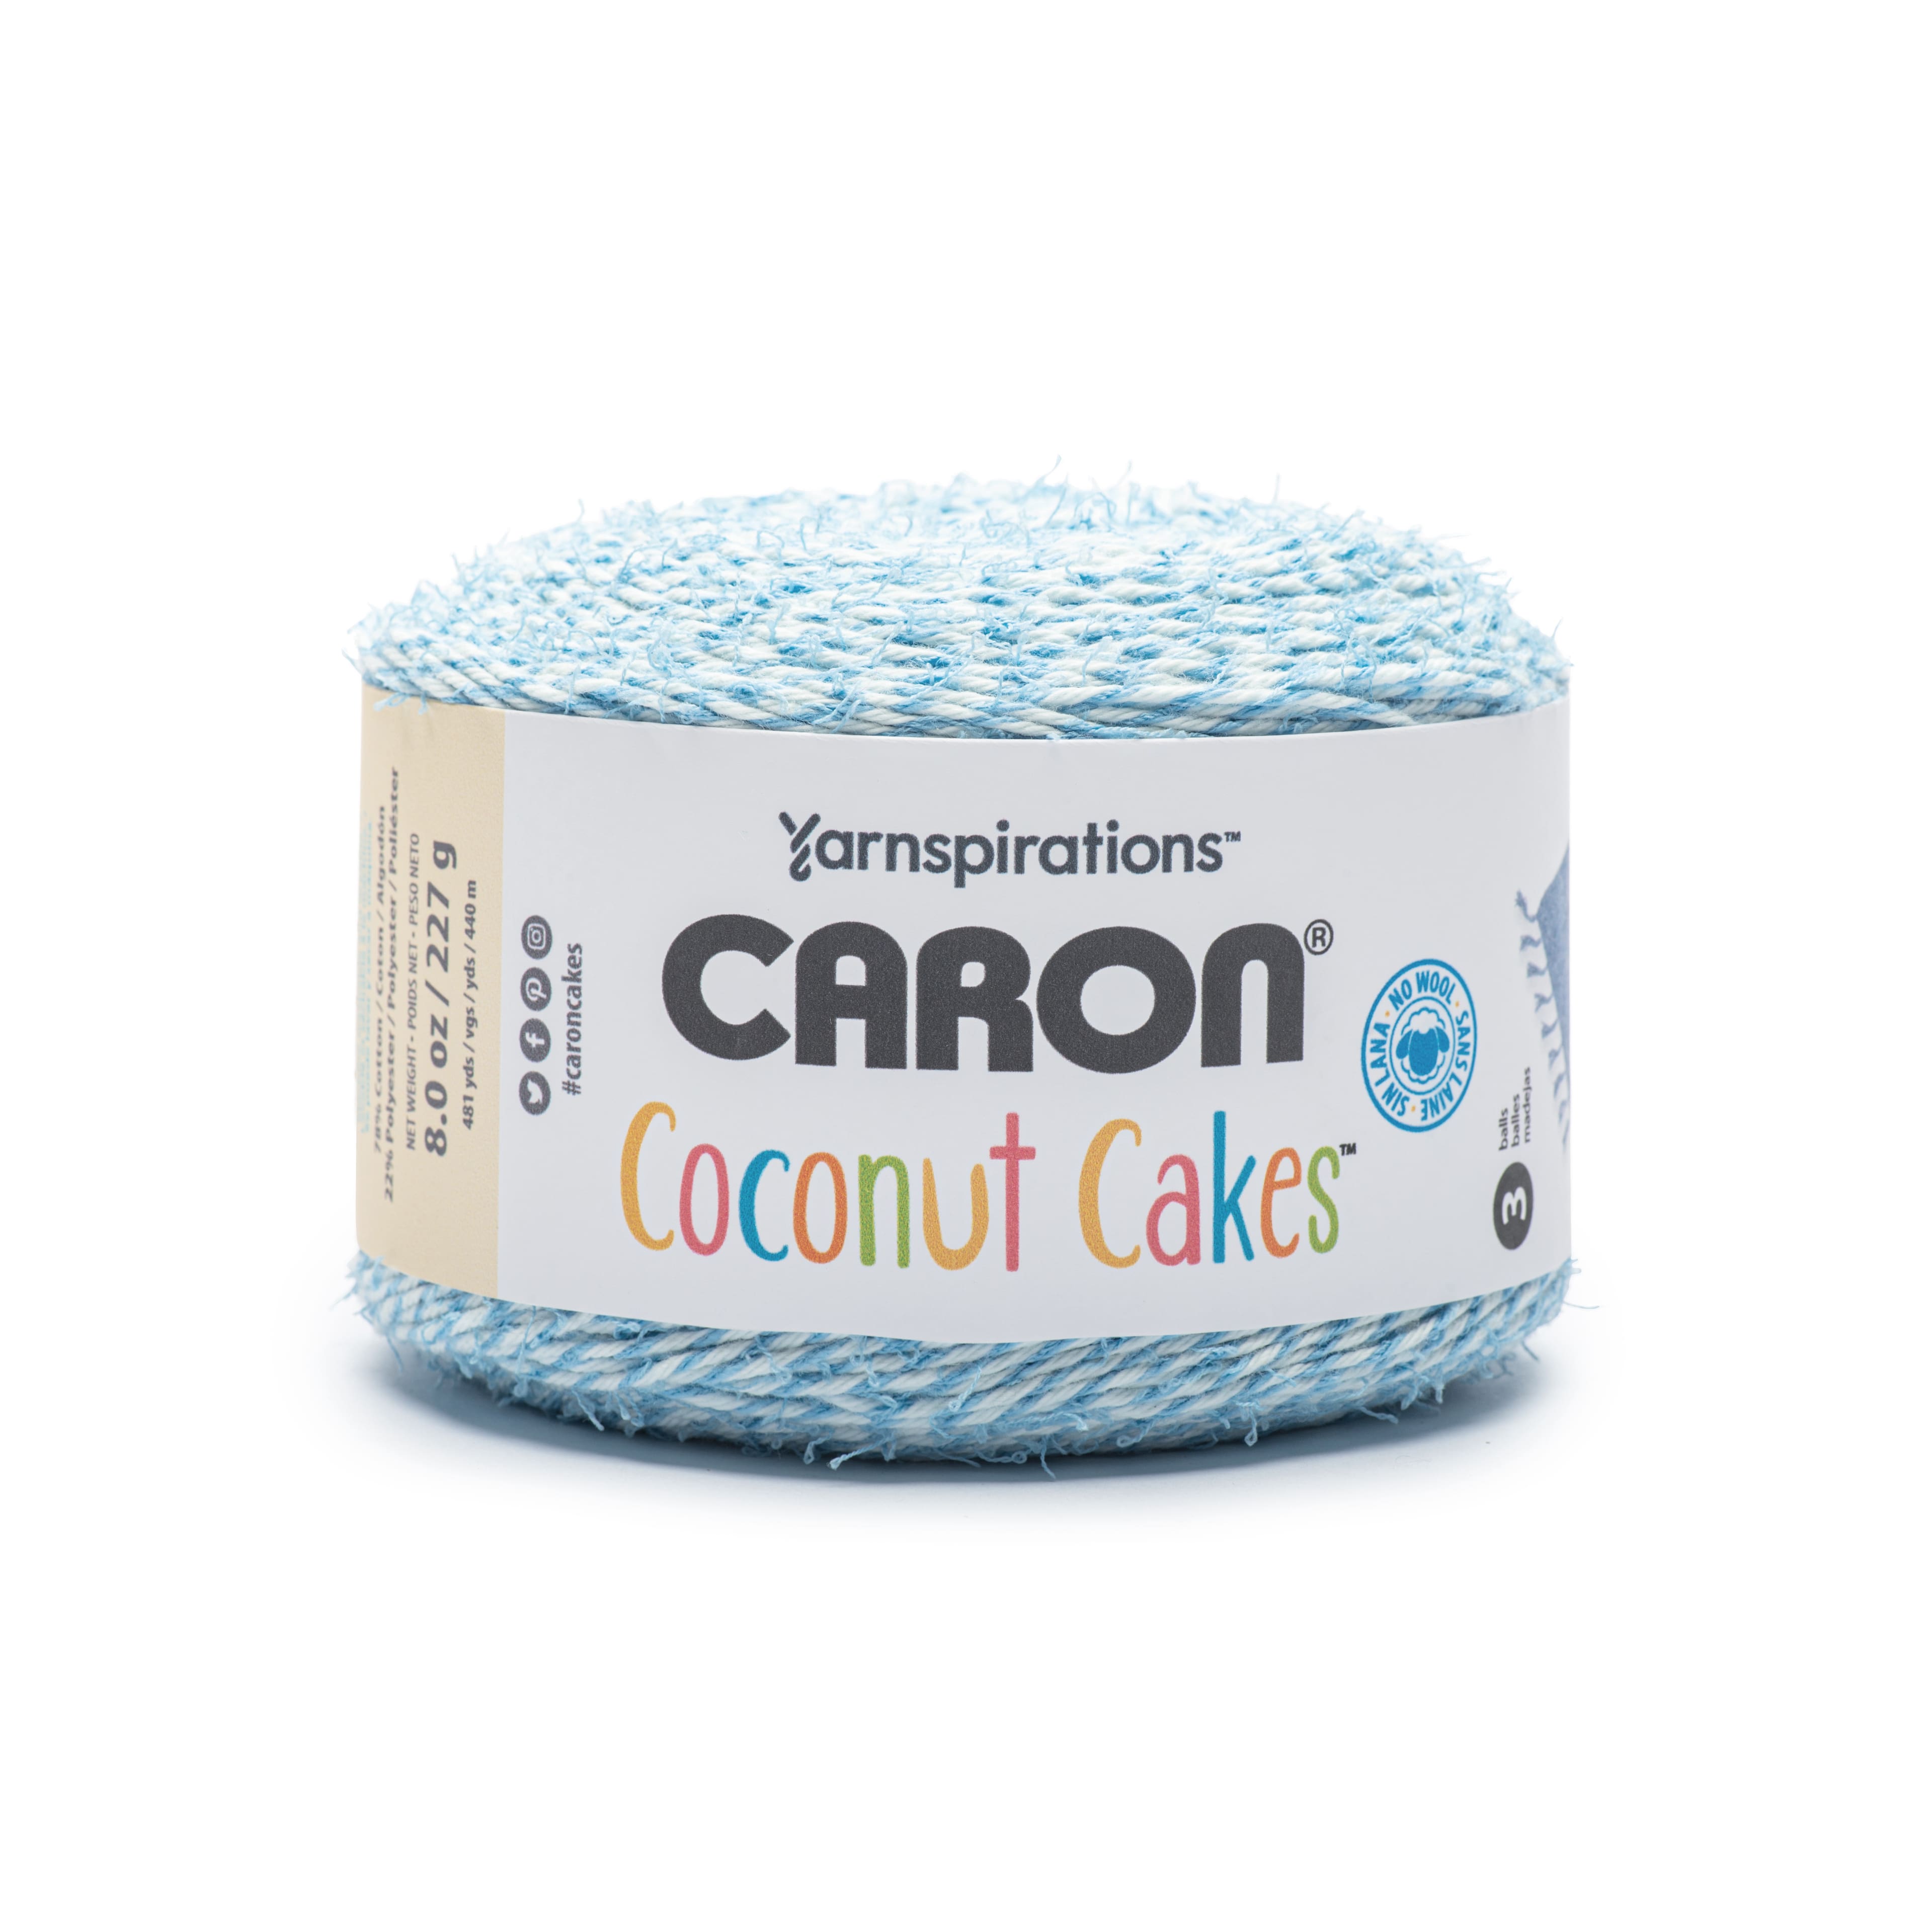 Caron Anniversary Cakes Yarn in Sweet/Sour Dots | 35.3 oz | Michaels